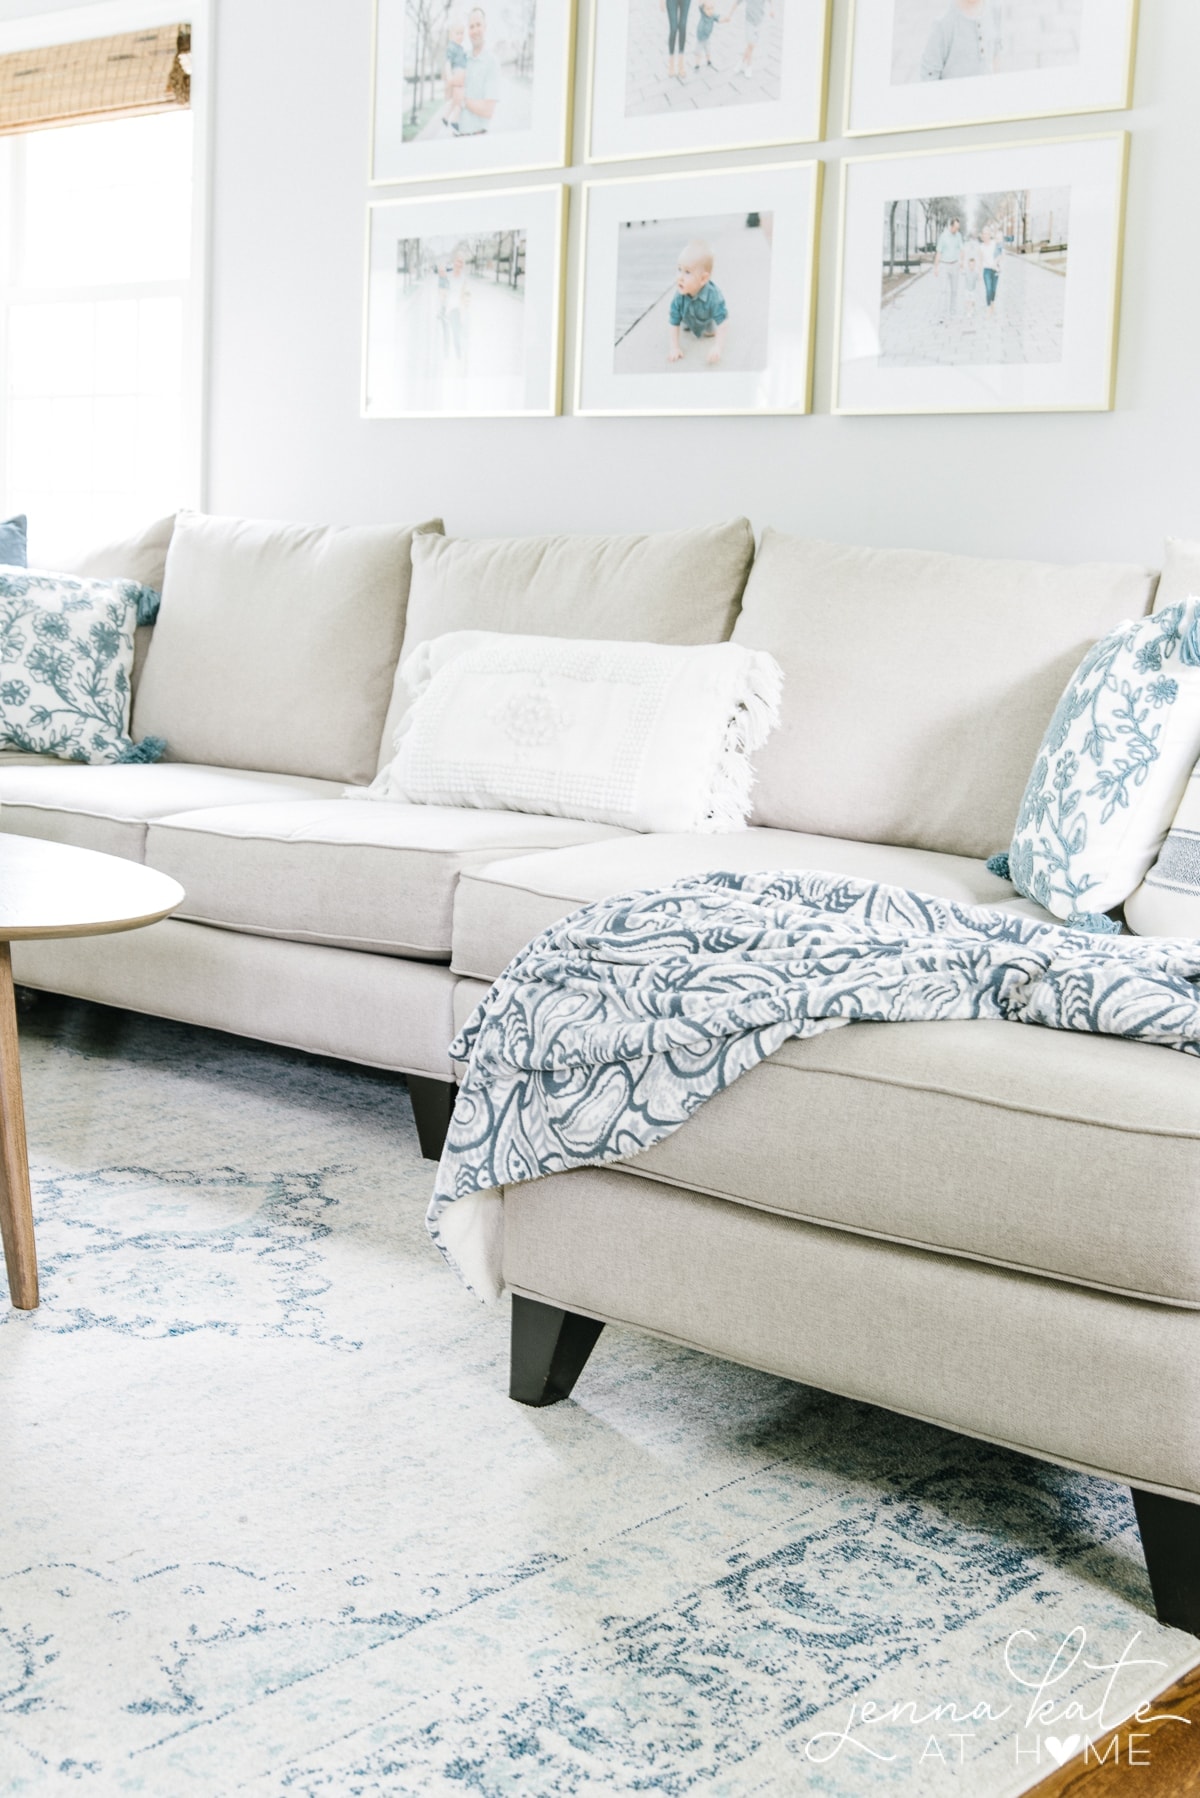 A white sofa with floral pillows and blue-patterned throw